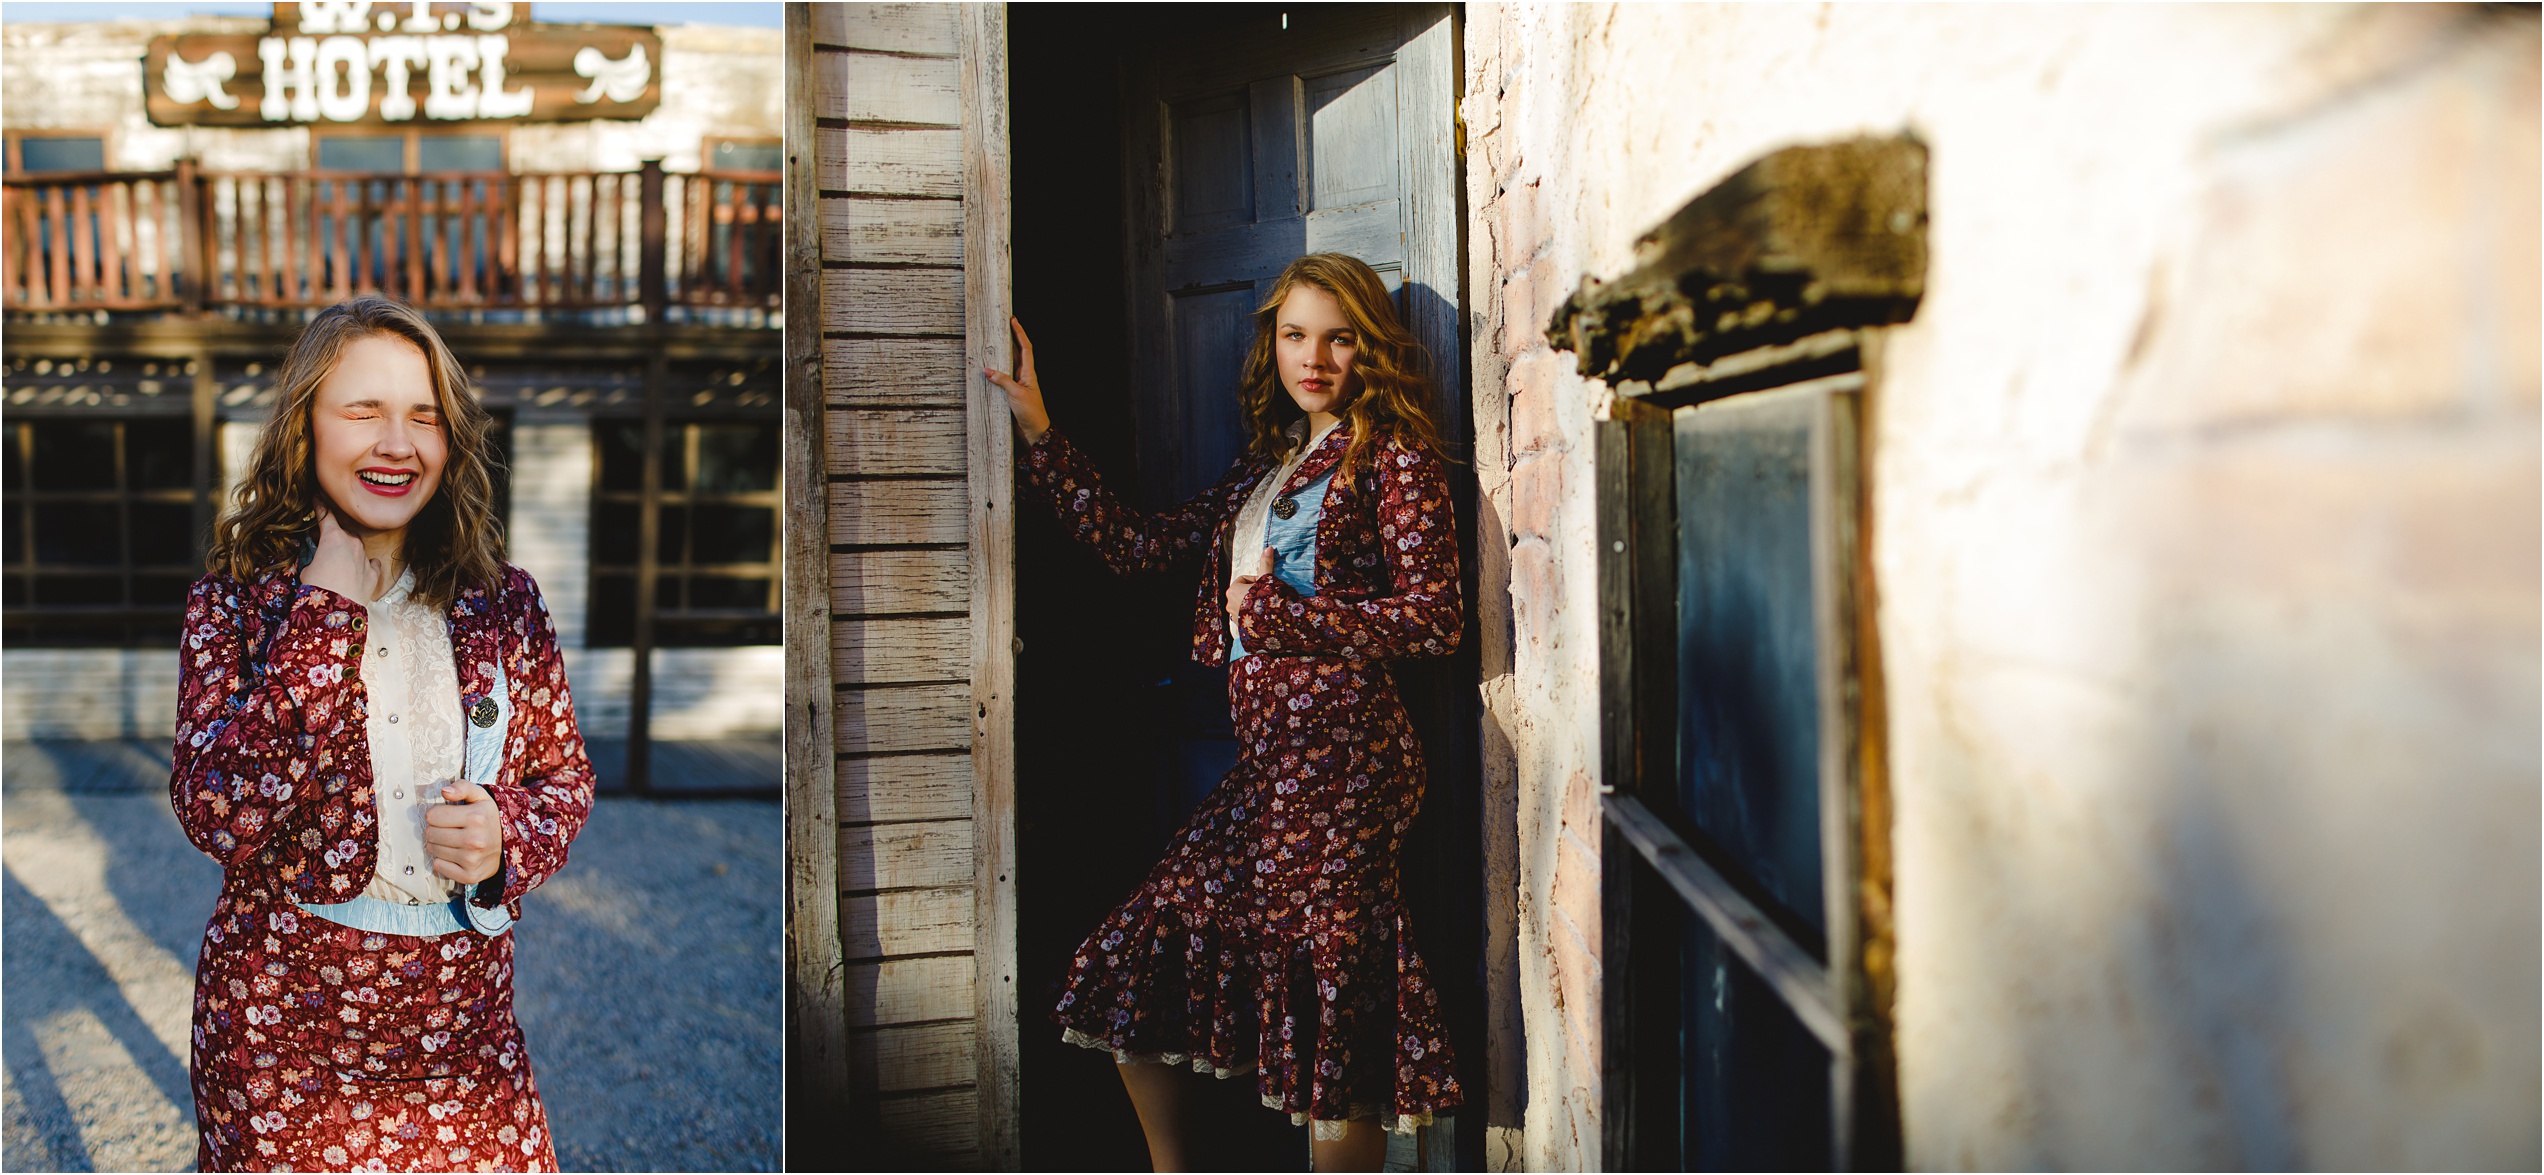 Abby posing in a two piece skirt and jacket floral set from Free People at an old western location with Slice of Lime Senior Photography.